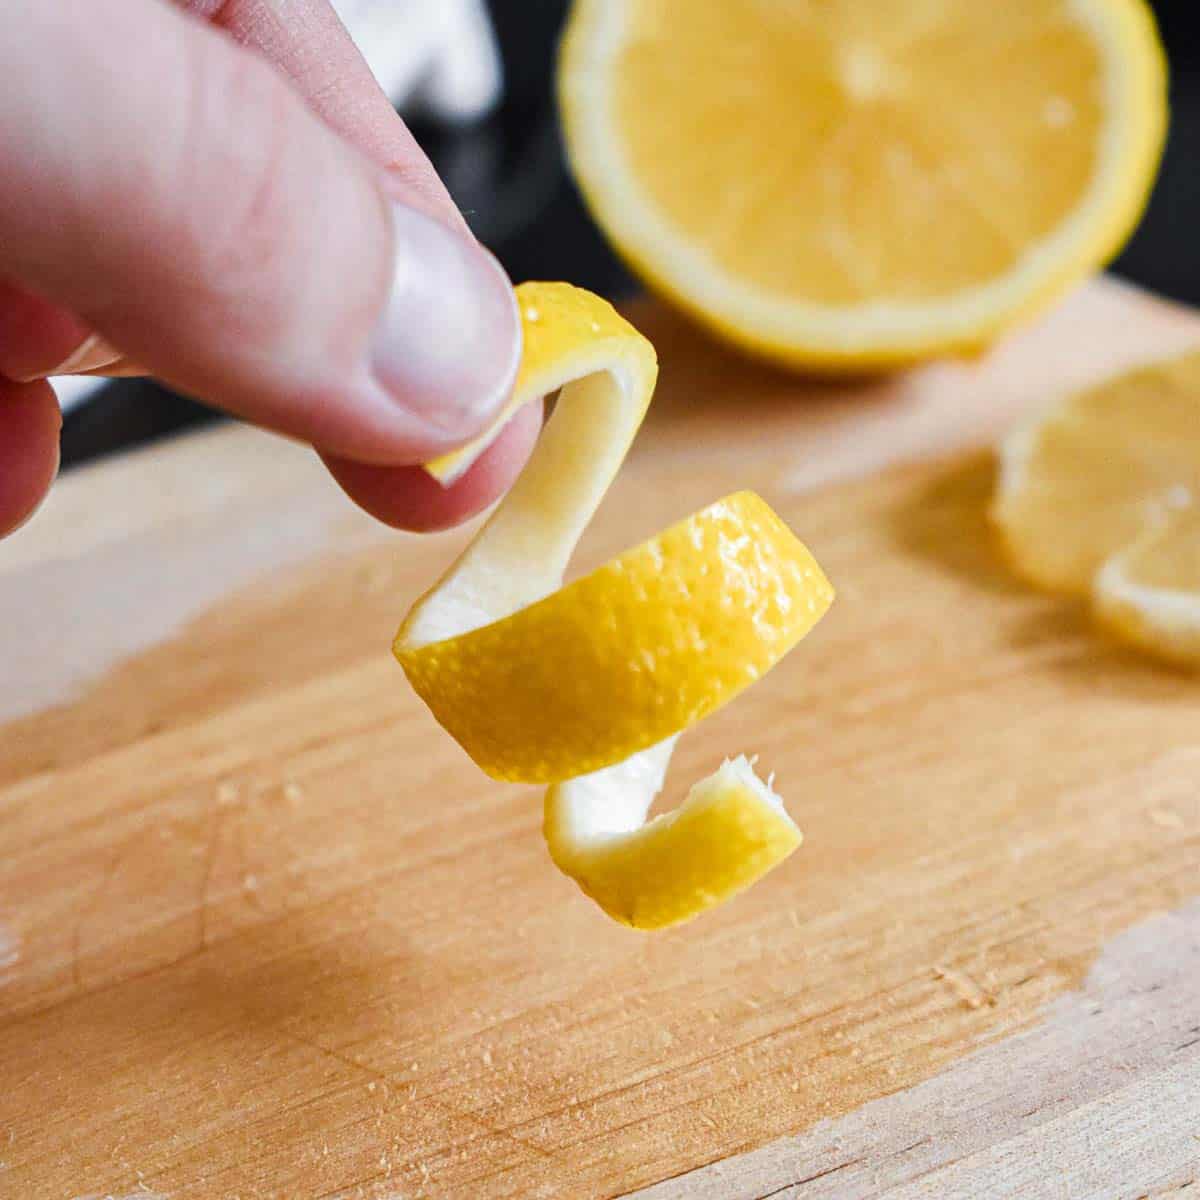 A curl of lemon twist garnish being held above a small wooden cutting board